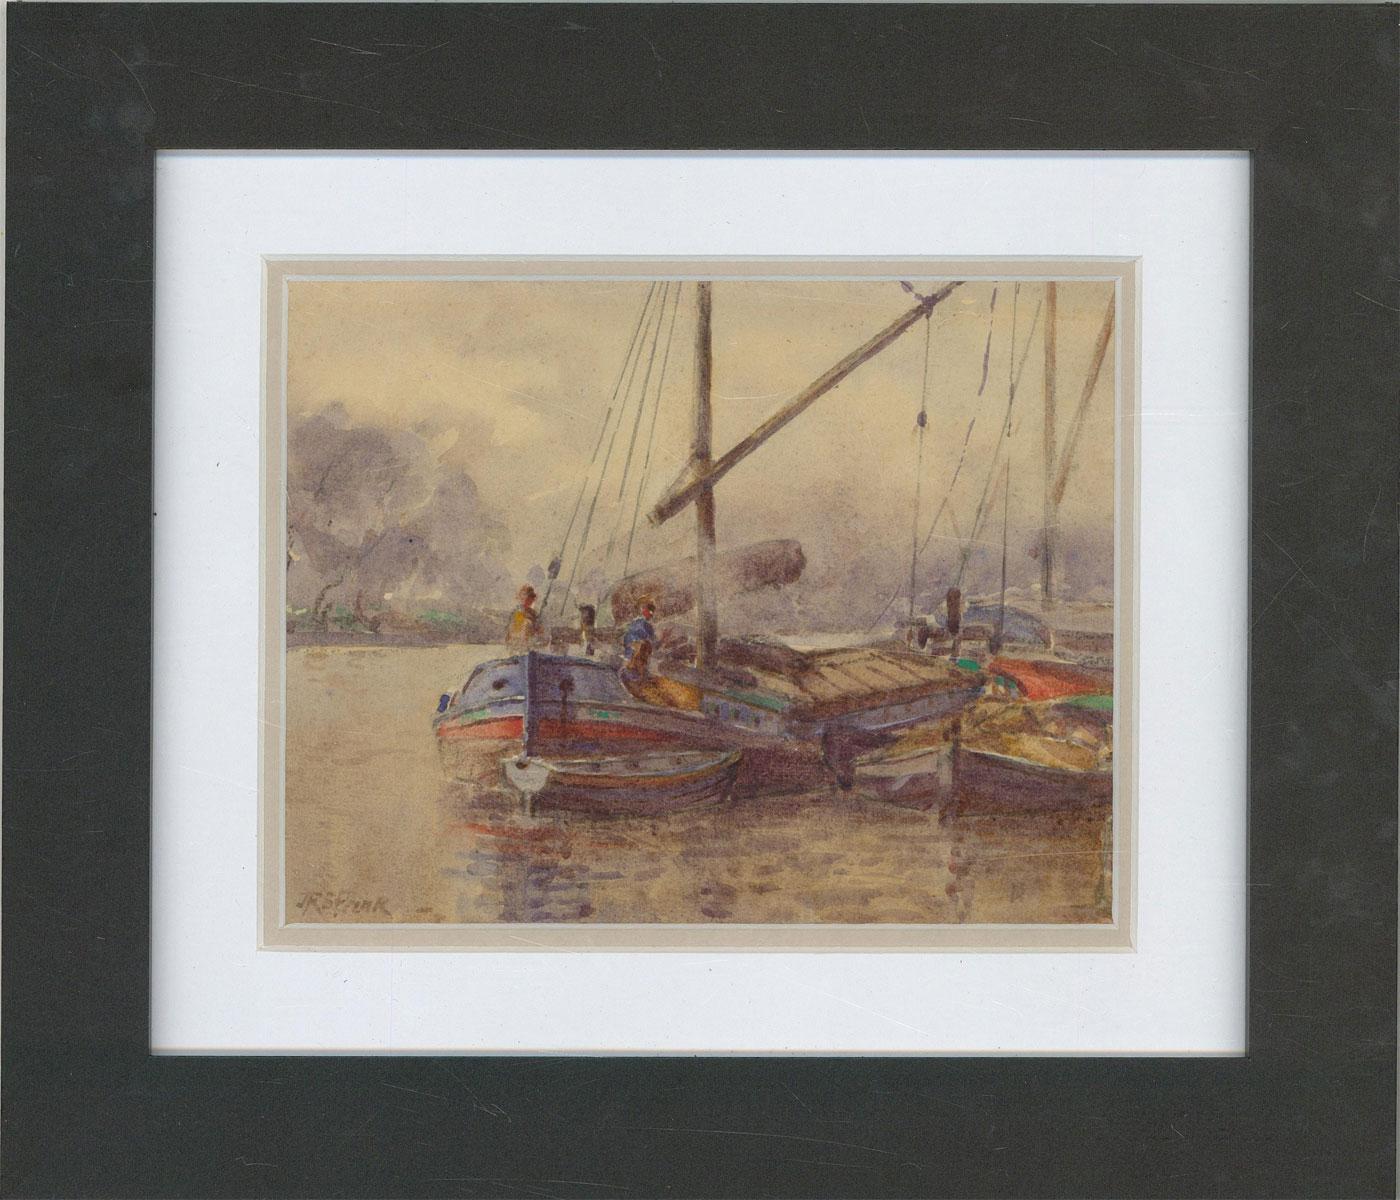 Well presented in a contemporary black frame with double card mount. Signed. On watercolour paper.
